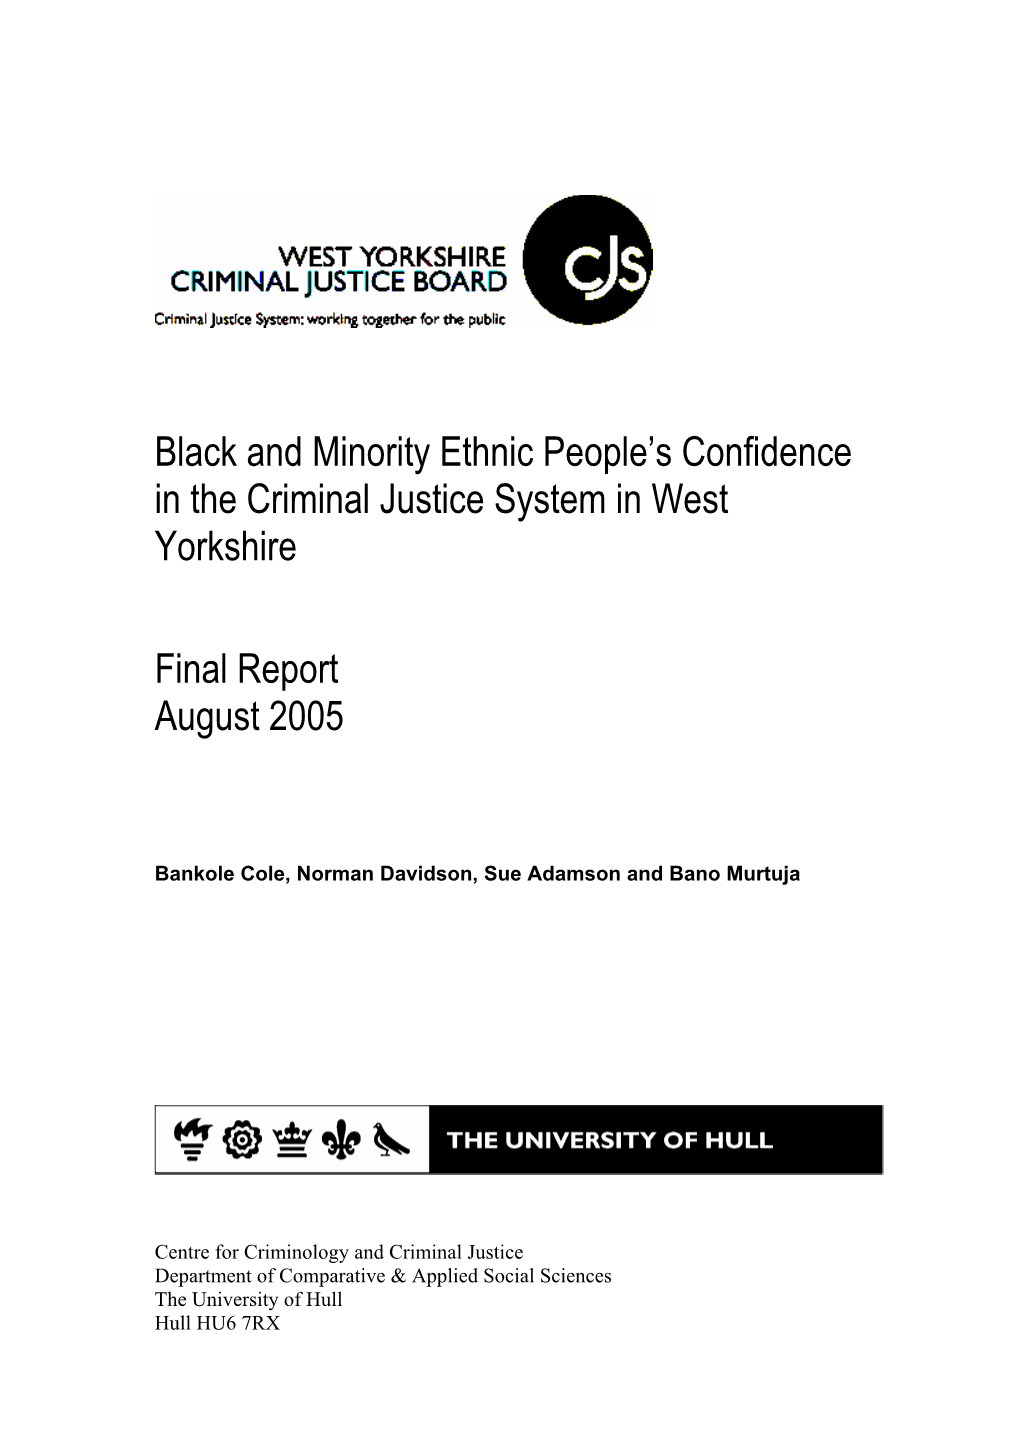 Black and Minority Ethnic People's Confidence in the Criminal Justice